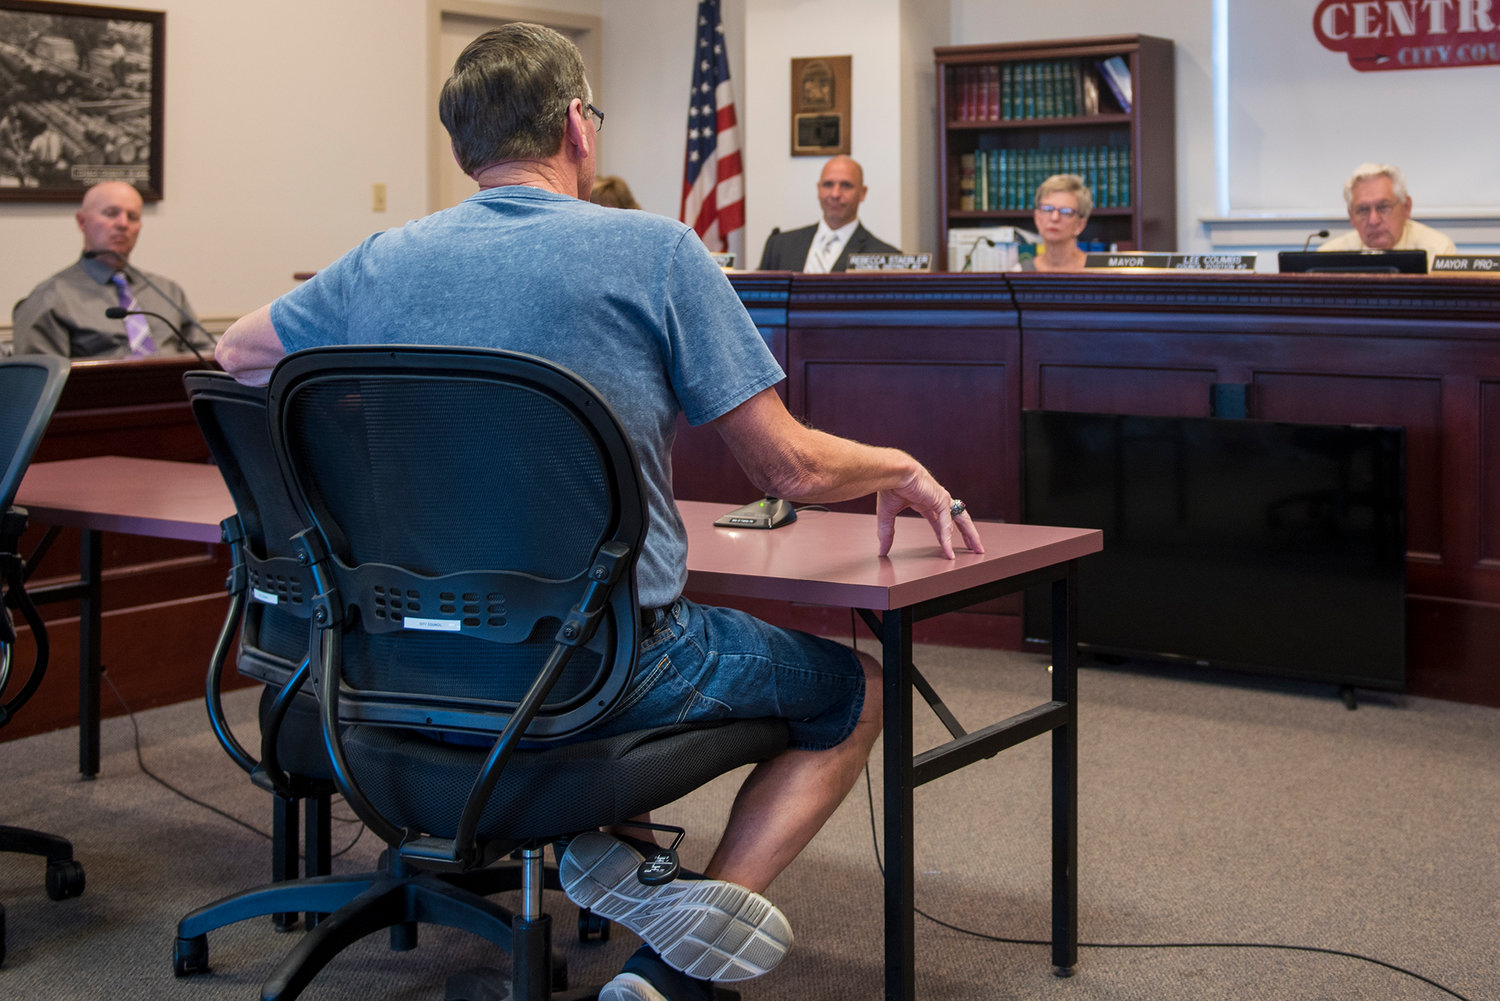 Chehalis Mayor Dennis Dawes shares his perspective on commercial fireworks during a workshop held Tuesday evening by the Centralia City Council.